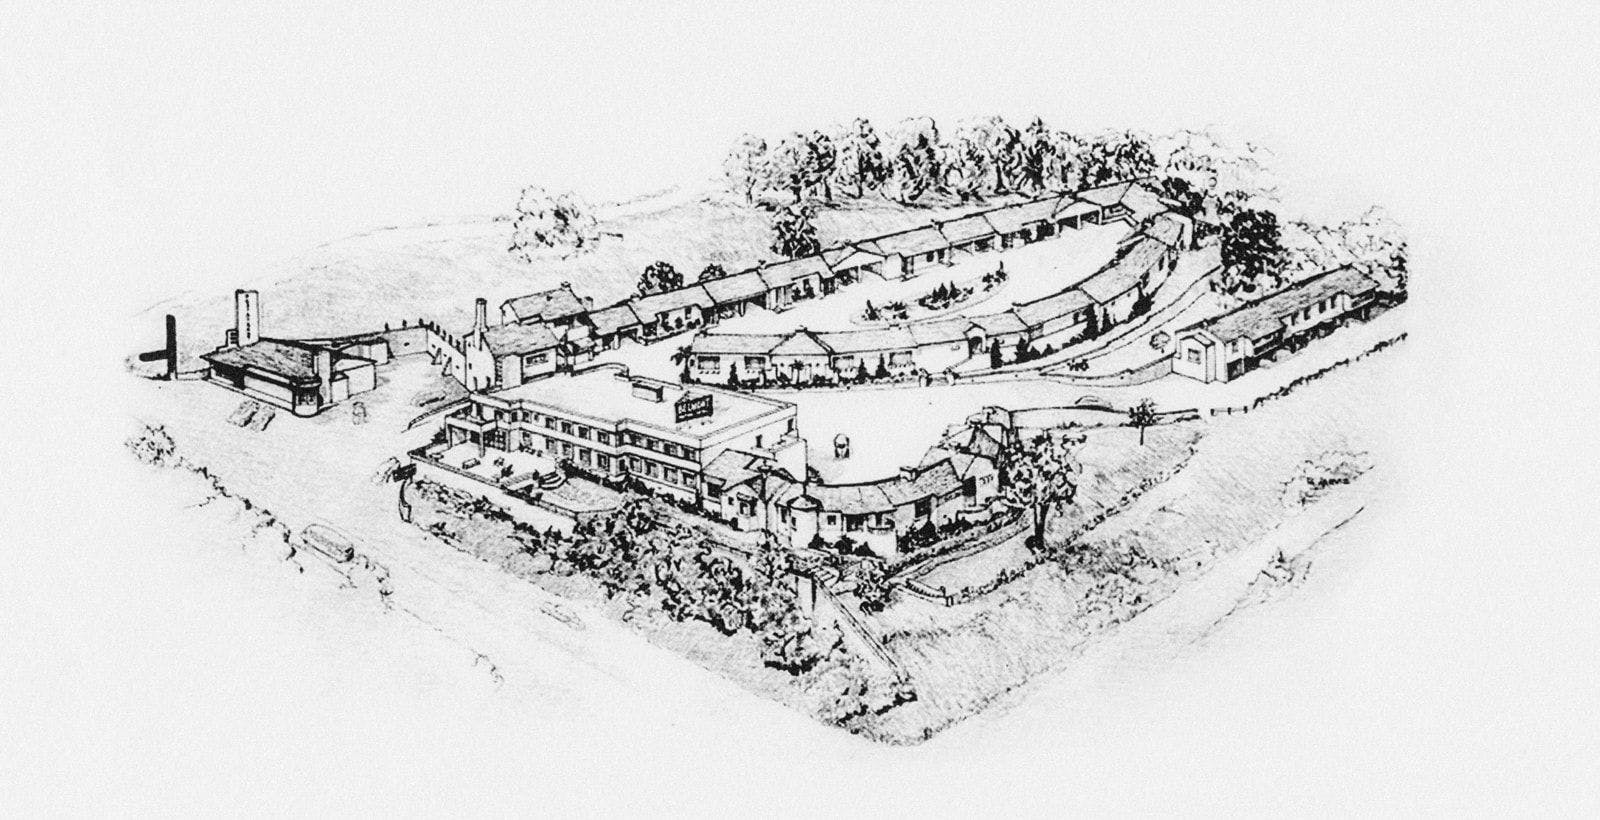 Sketch of an aerial view of the Belmont Hotel